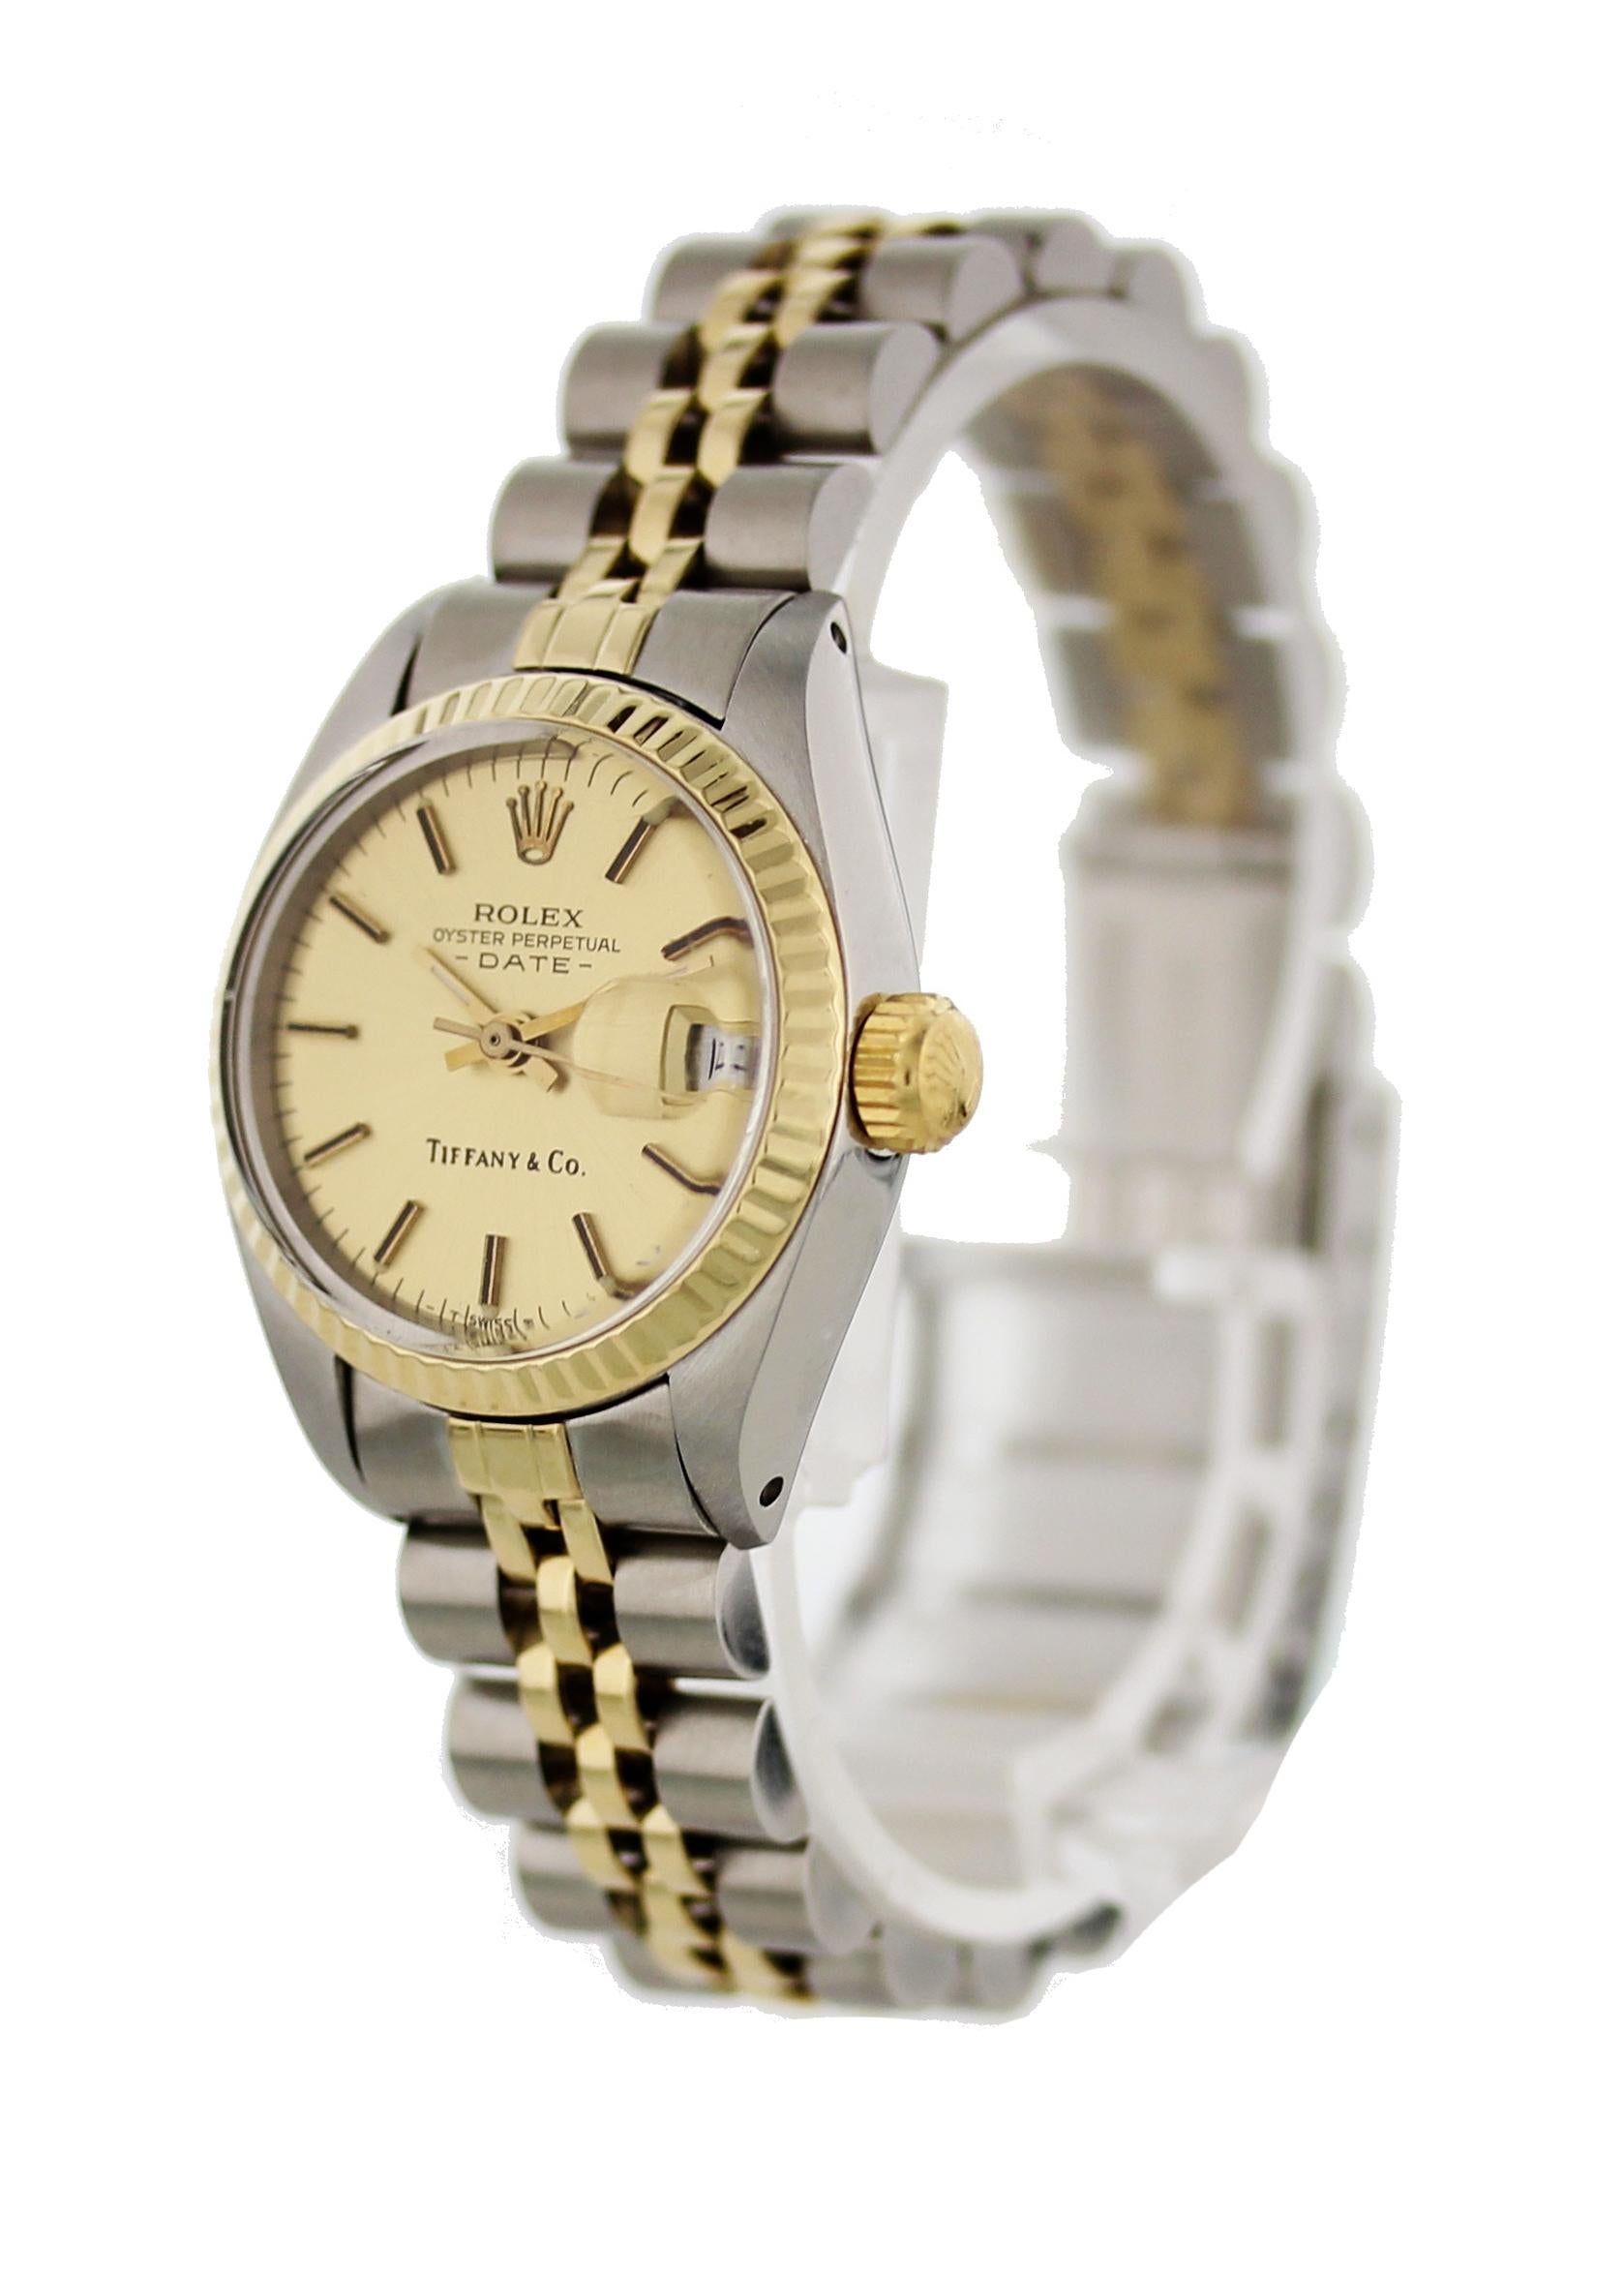 Ladies Rolex Oyster Perpetual Date 6917. 26 mm stainless steel case. 18k yellow gold fluted bezel. Champagne Tiffany dial with yellow gold hands and markers. 18k yellow gold and stainless steel Jubilee band with a stainless steel fold-over clasp